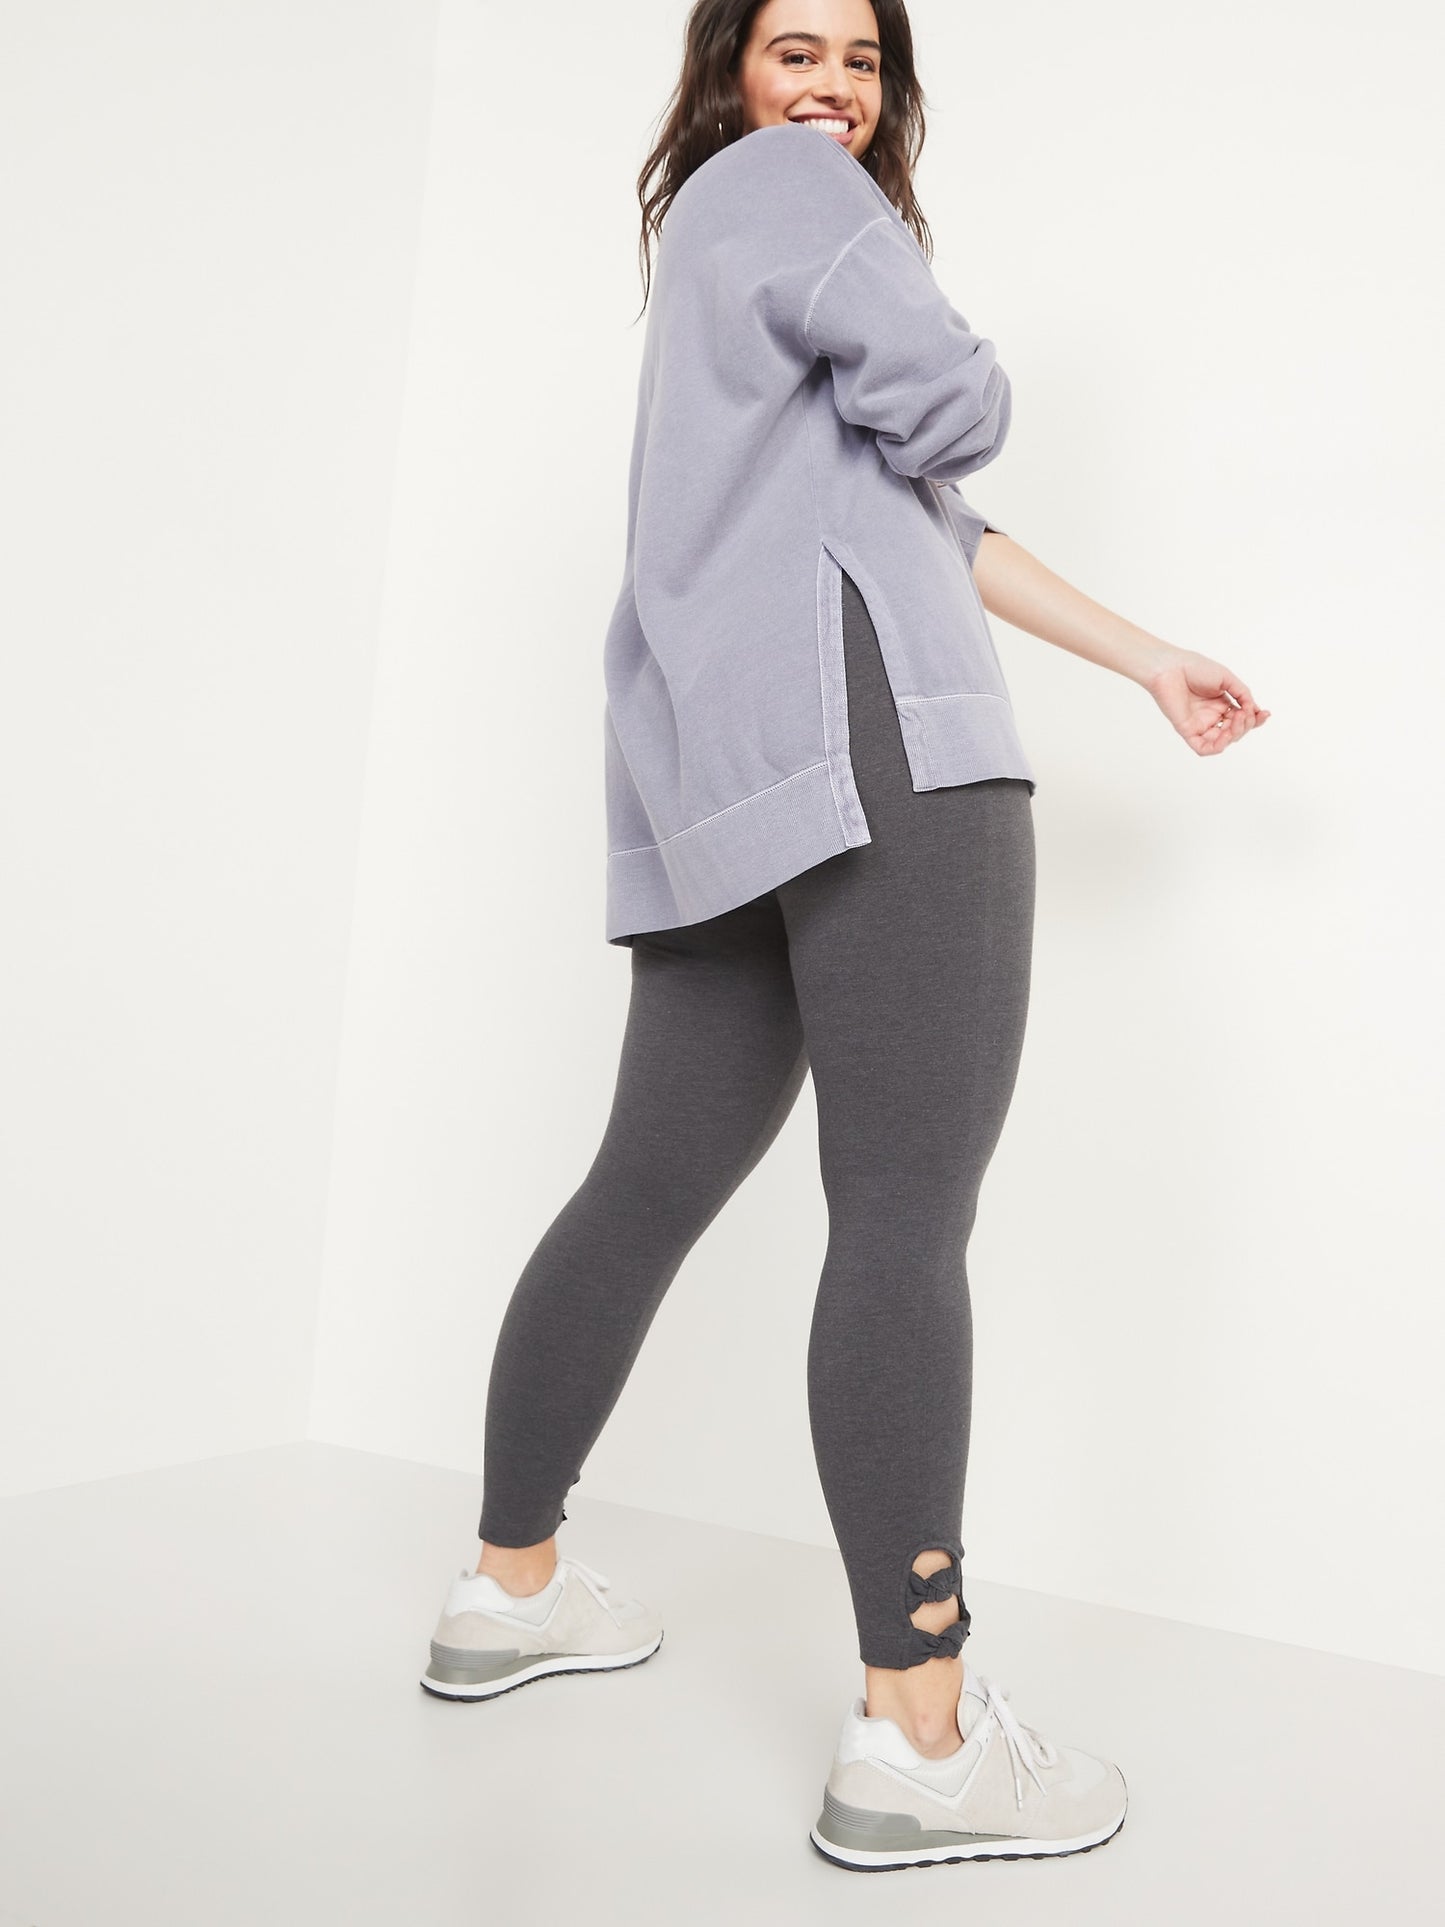 ON High-Waisted Double-Knot Ankle Leggings For Women - Heather Grey